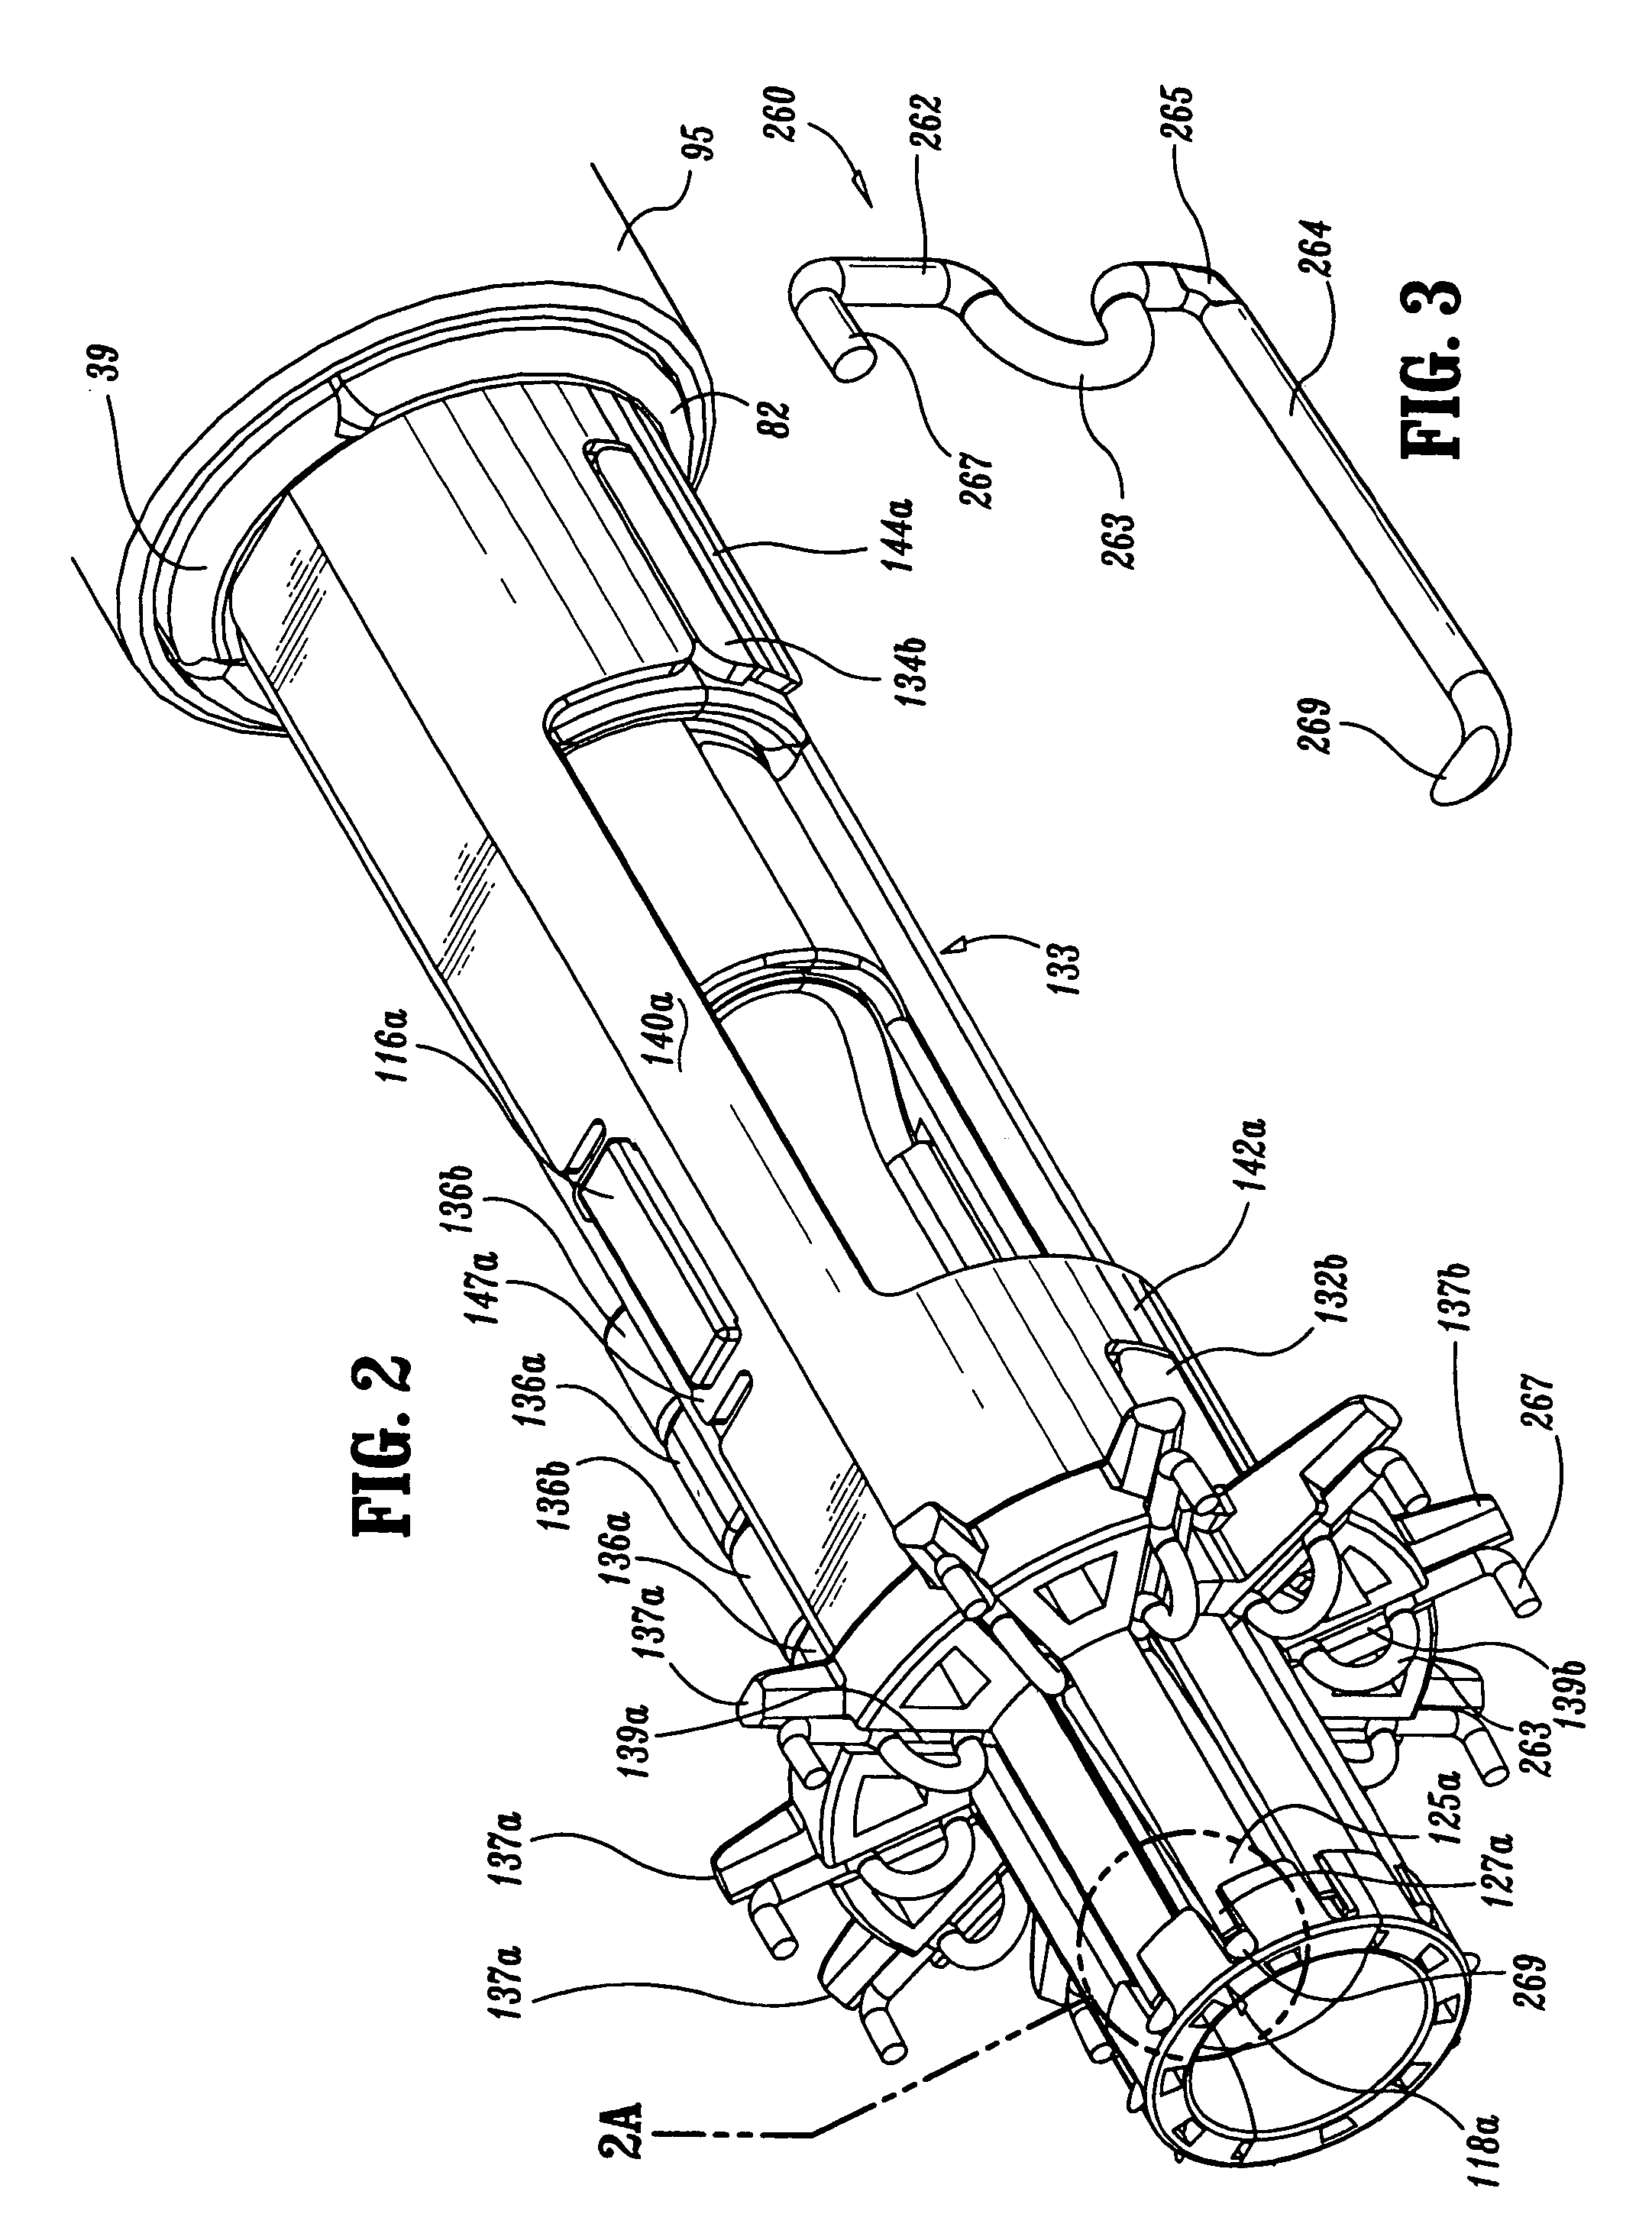 Anastomosis instrument and method for performing same